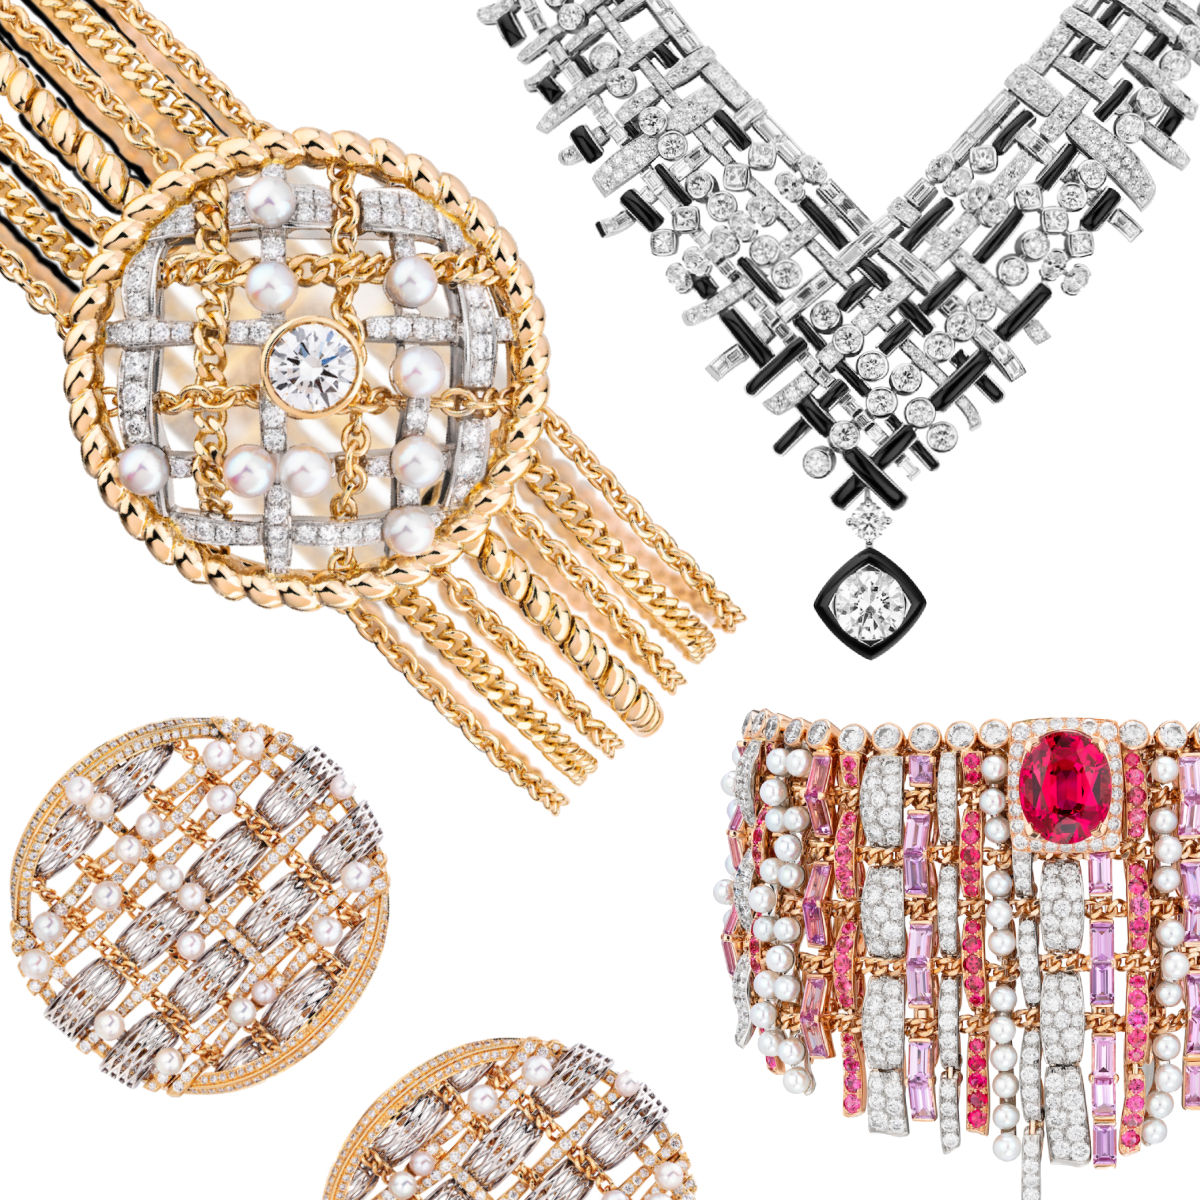 Chanel's latest high jewellery collection is an ode to the iconic tweed